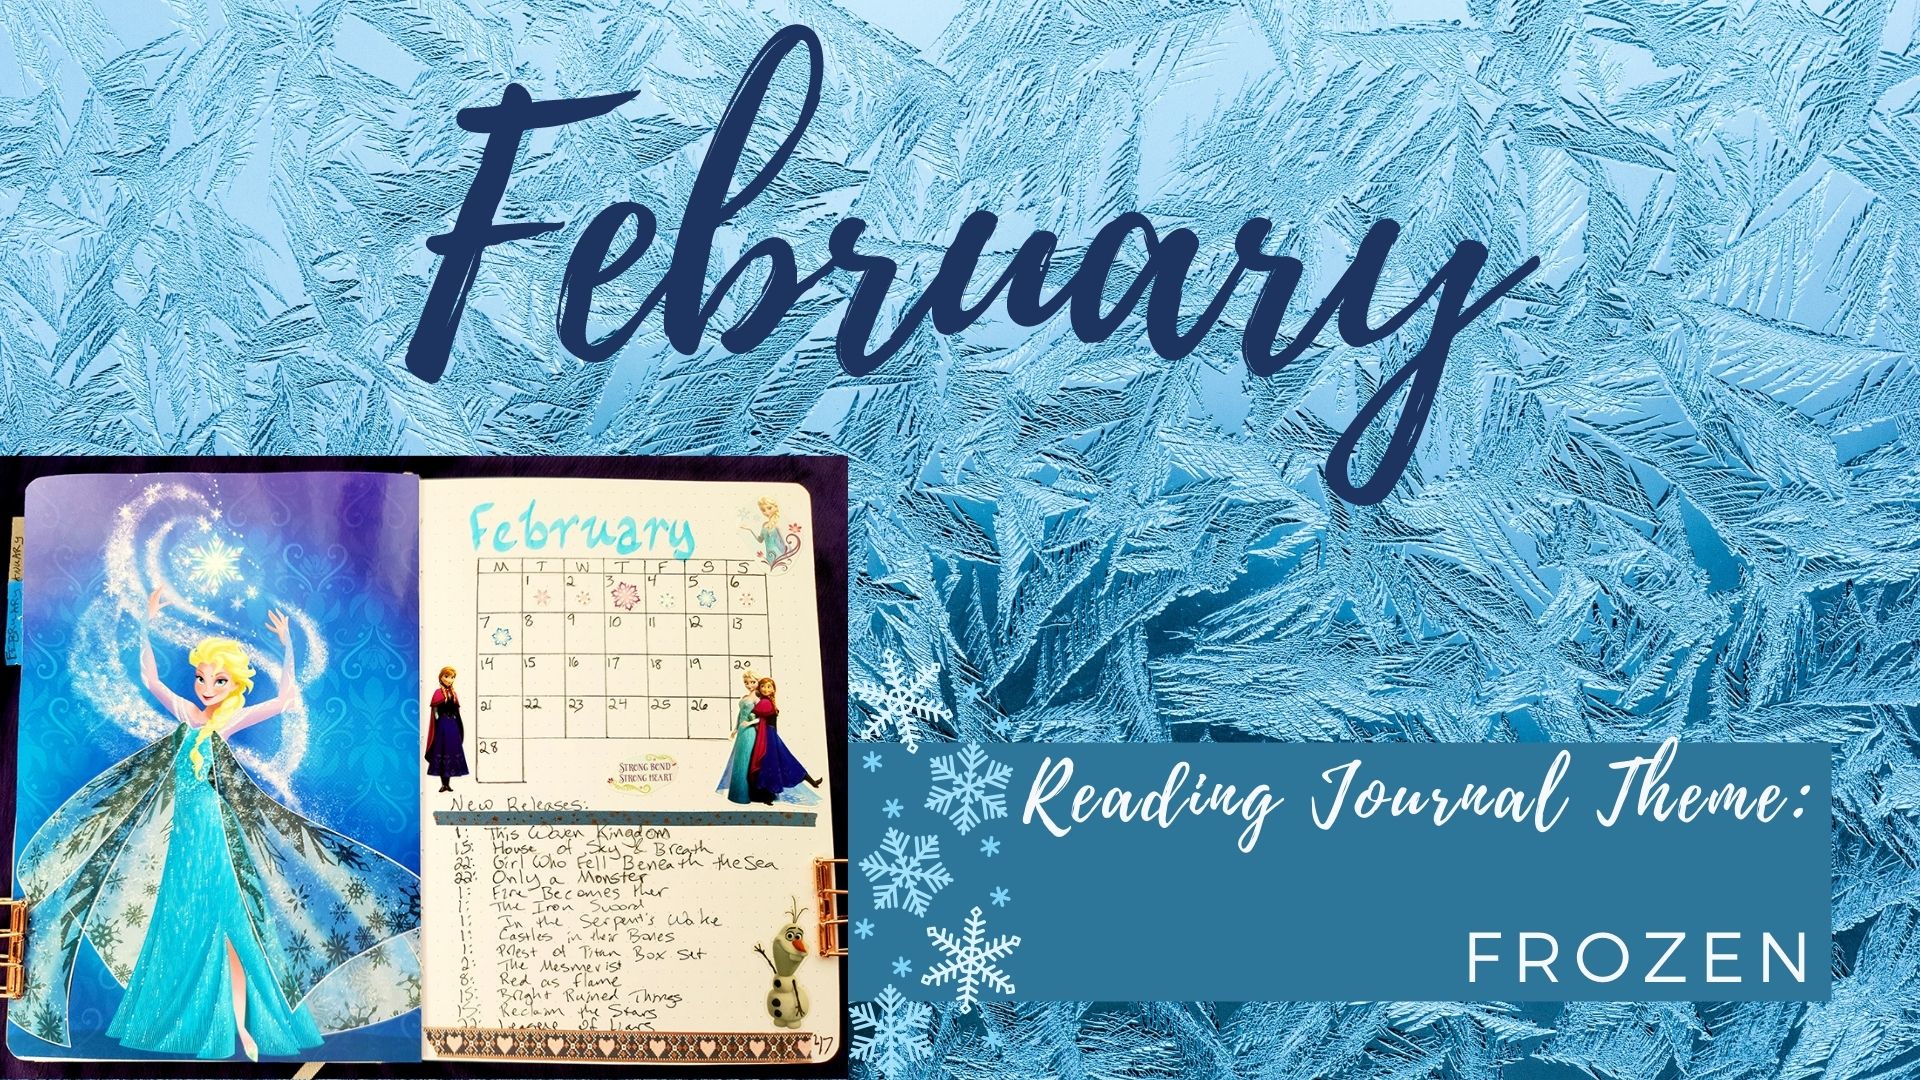 You are currently viewing February Reading Journal Theme: Frozen